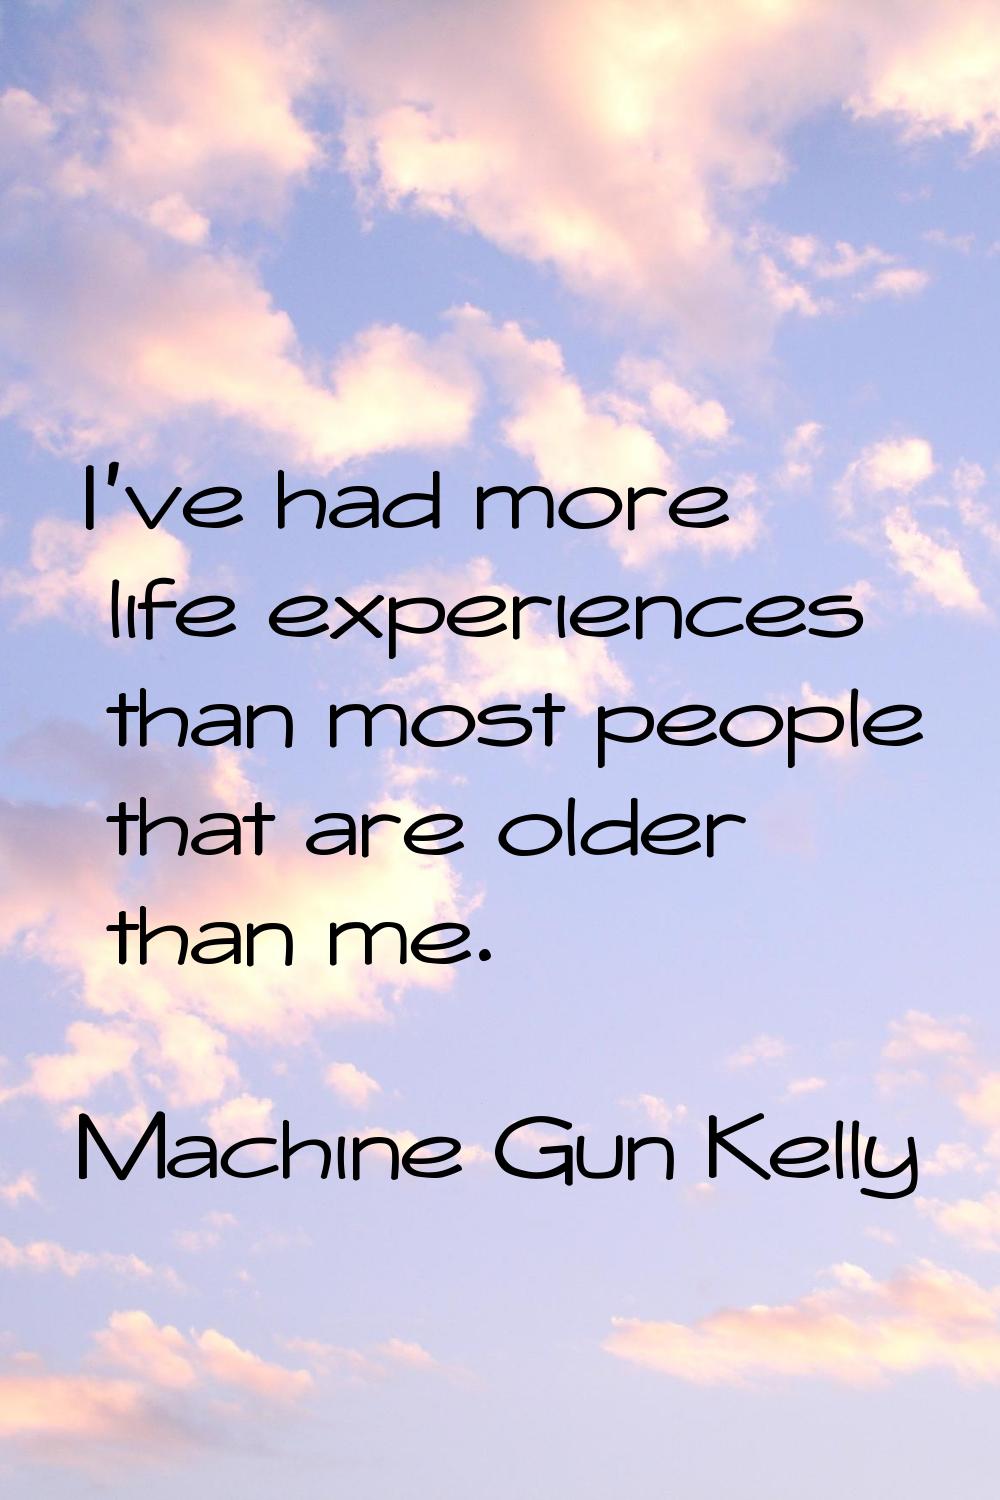 I've had more life experiences than most people that are older than me.